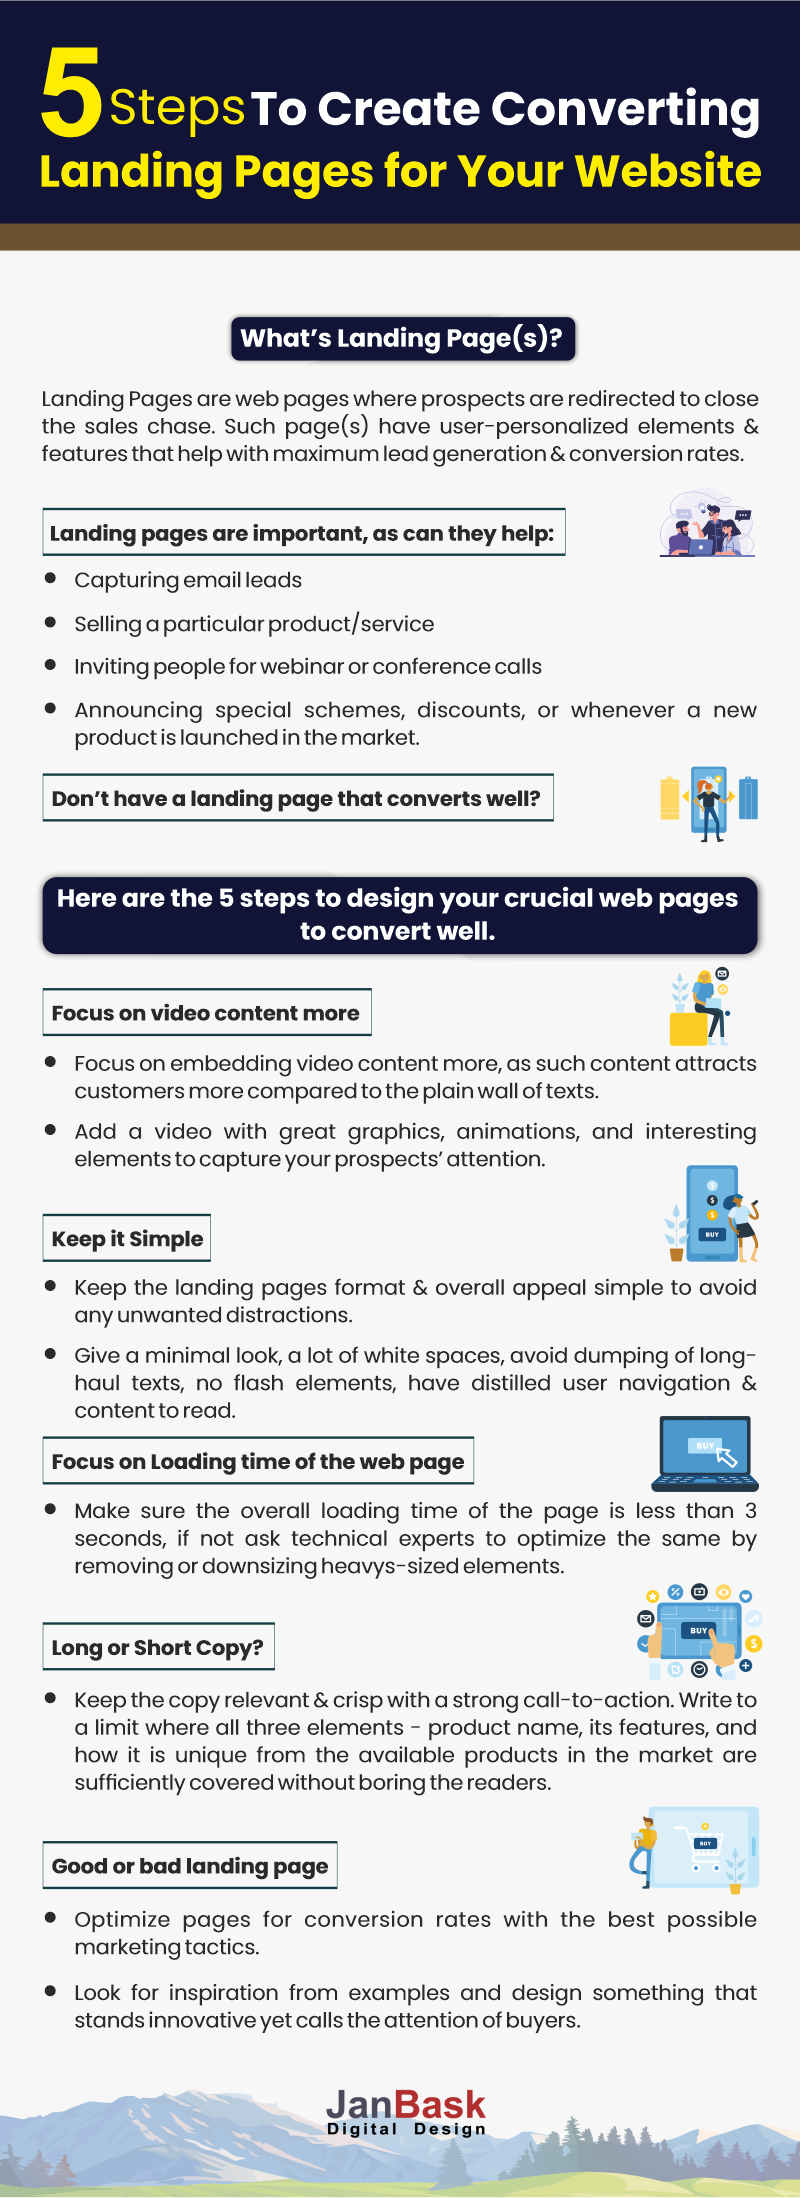 Steps to create converting landing pages